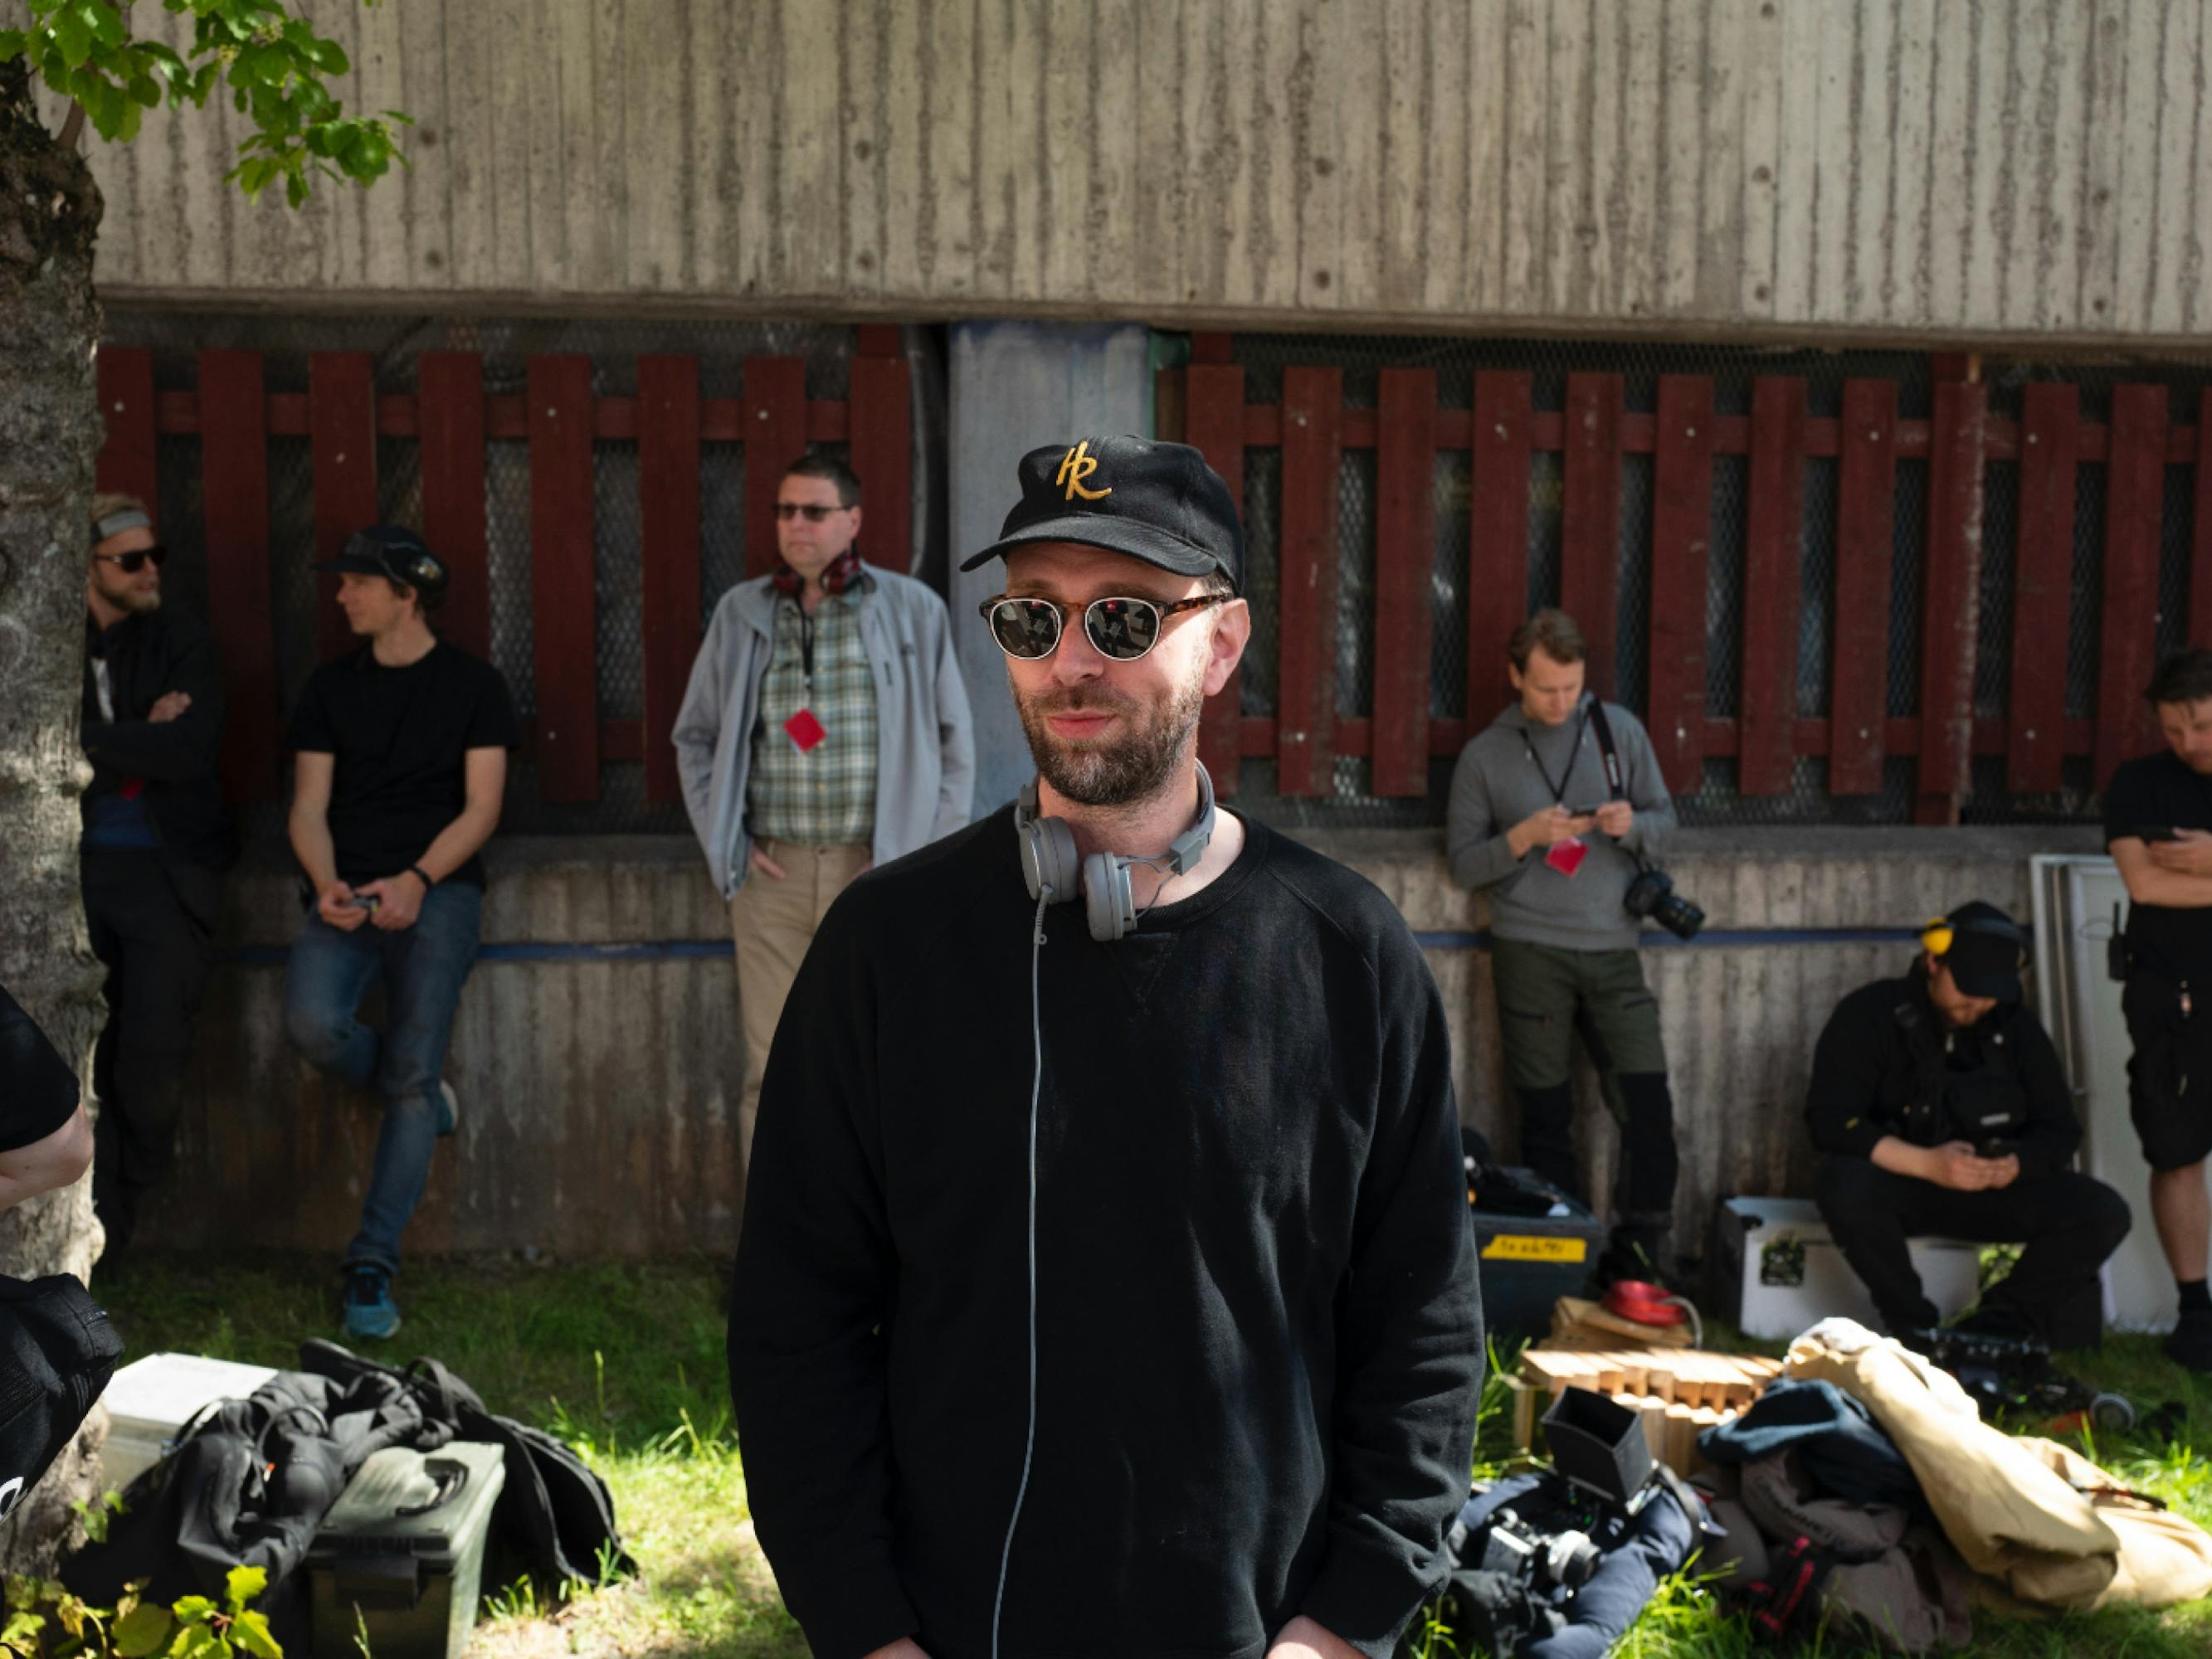 Co-creator and director Jesper Ganslandt on the set of Snabba Cash. He wears a black longsleeve, black hat, sunglasses, and earphones around his neck. There are seven other crew people in the background equipped with cameras and lanyards.